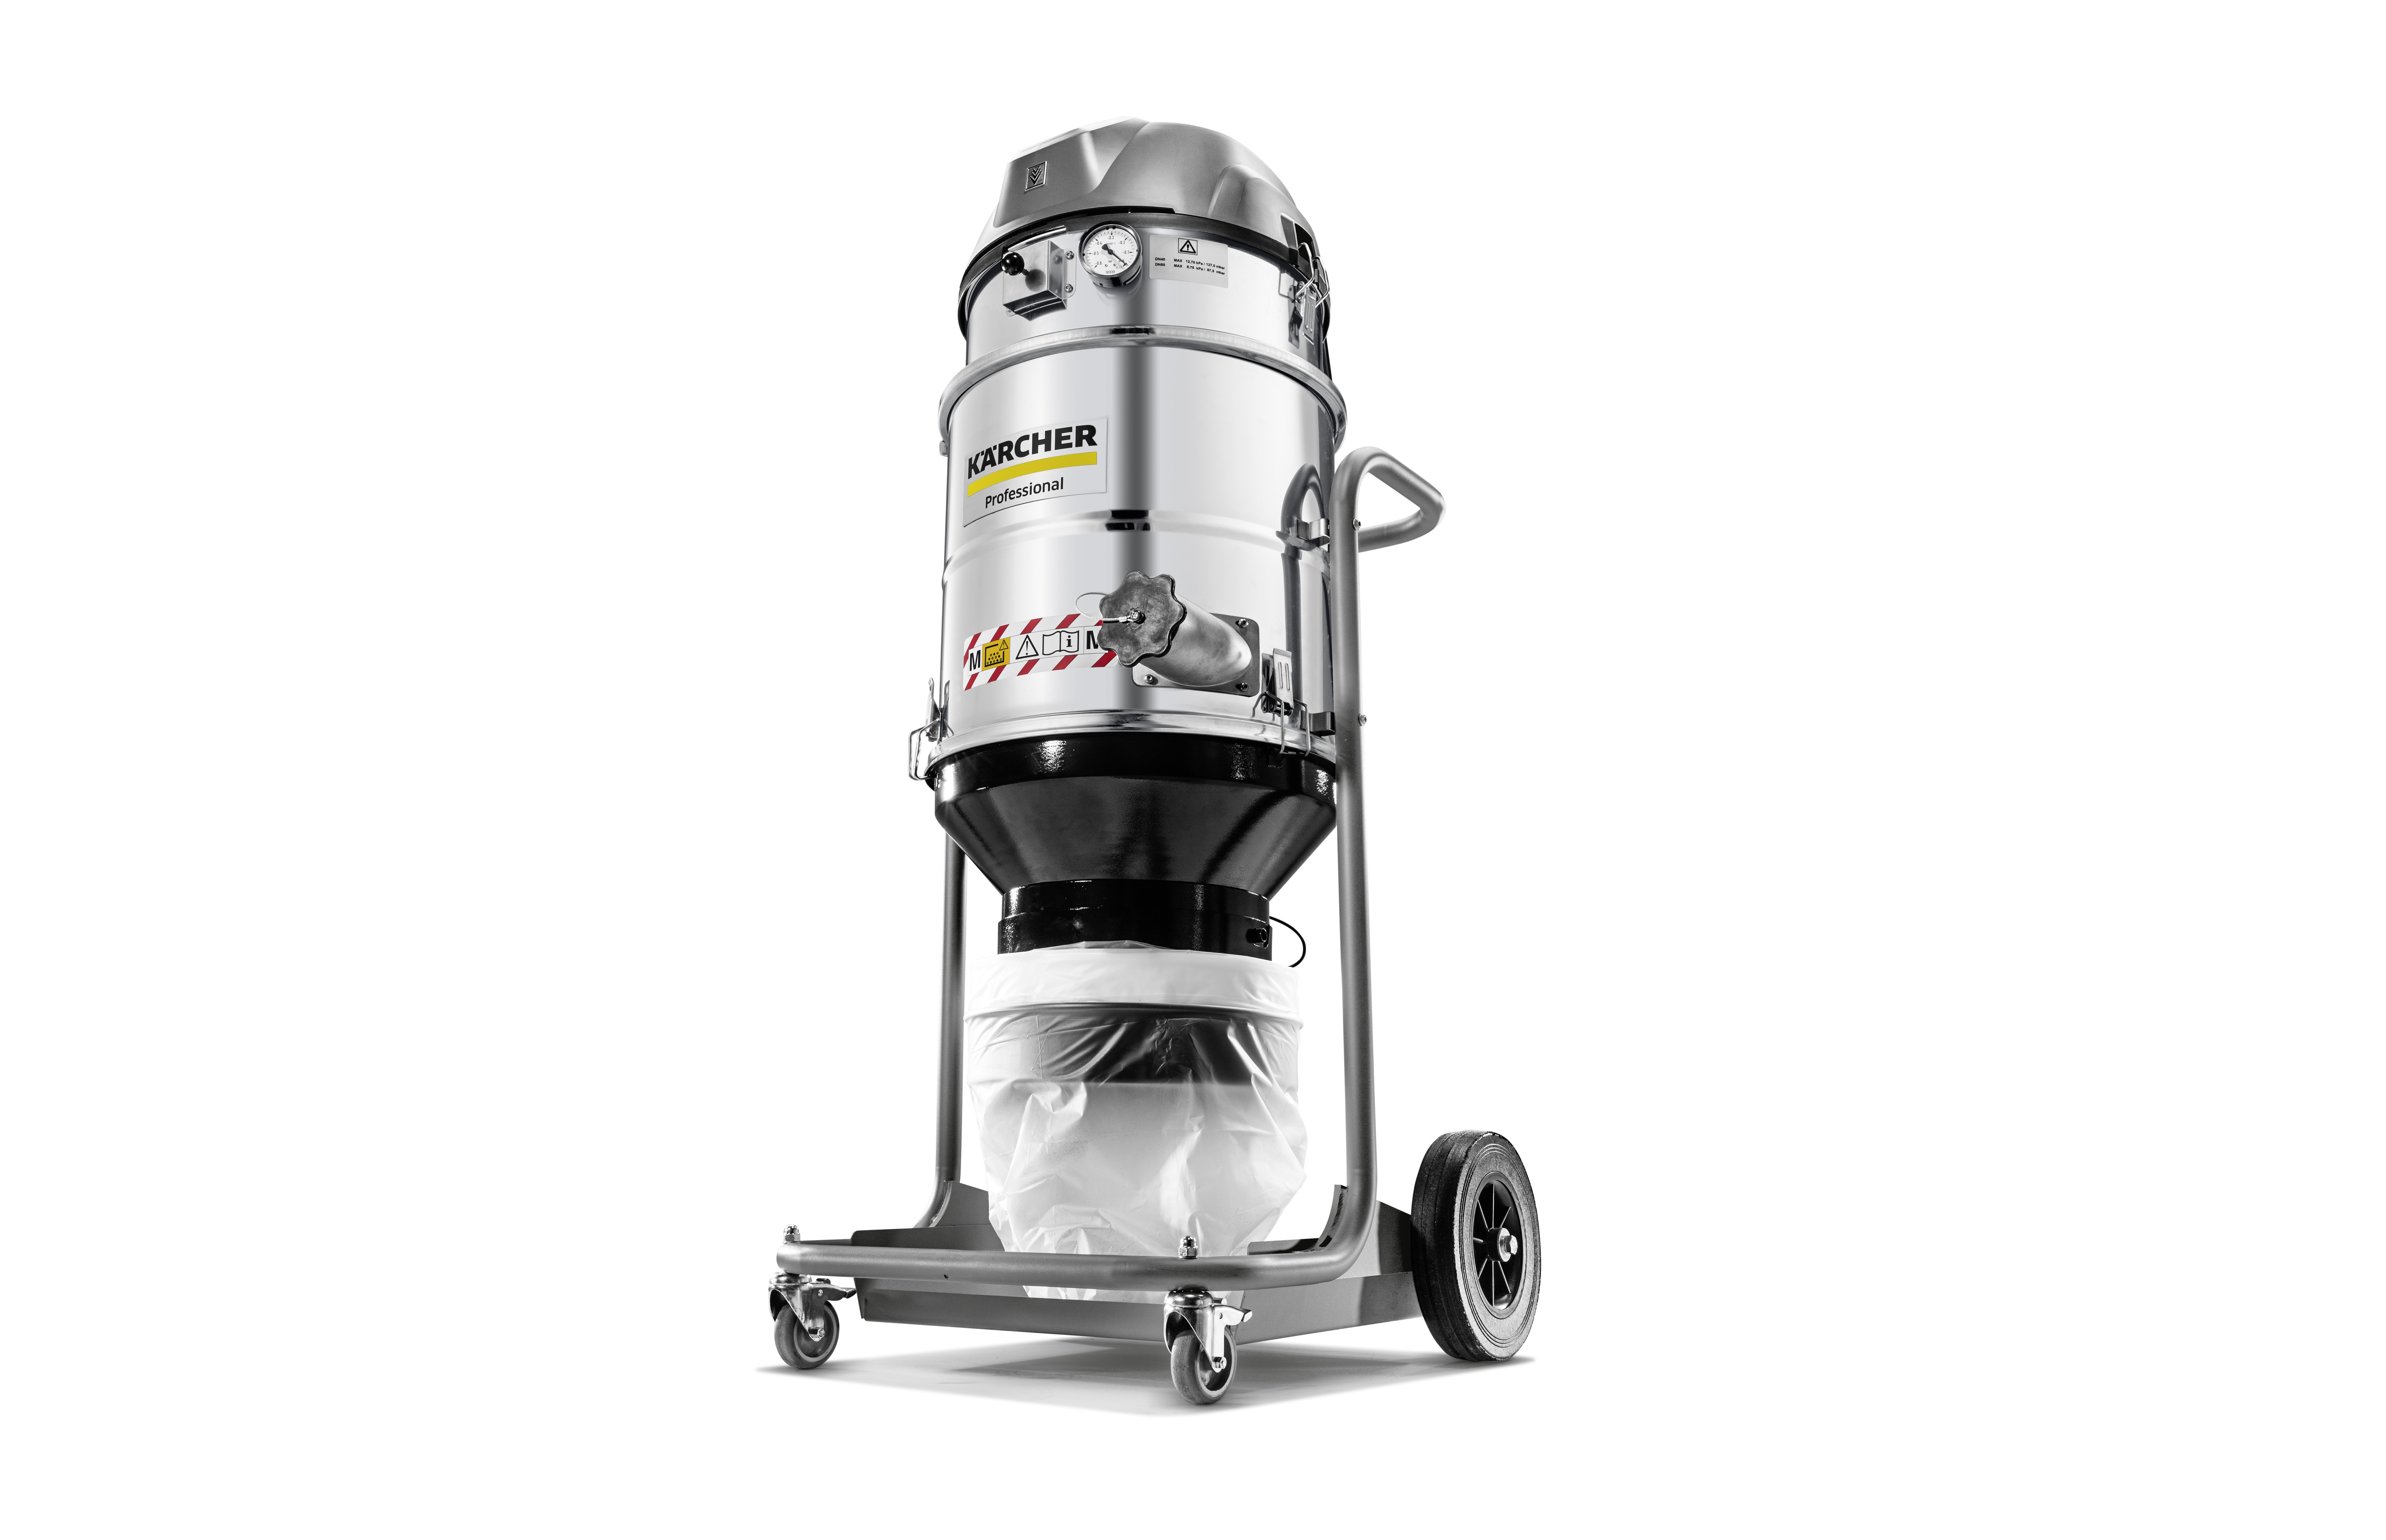 The IVM 40/24-2 H ACD is also able to vacuum combustible types of dust outside of ATEX zones.